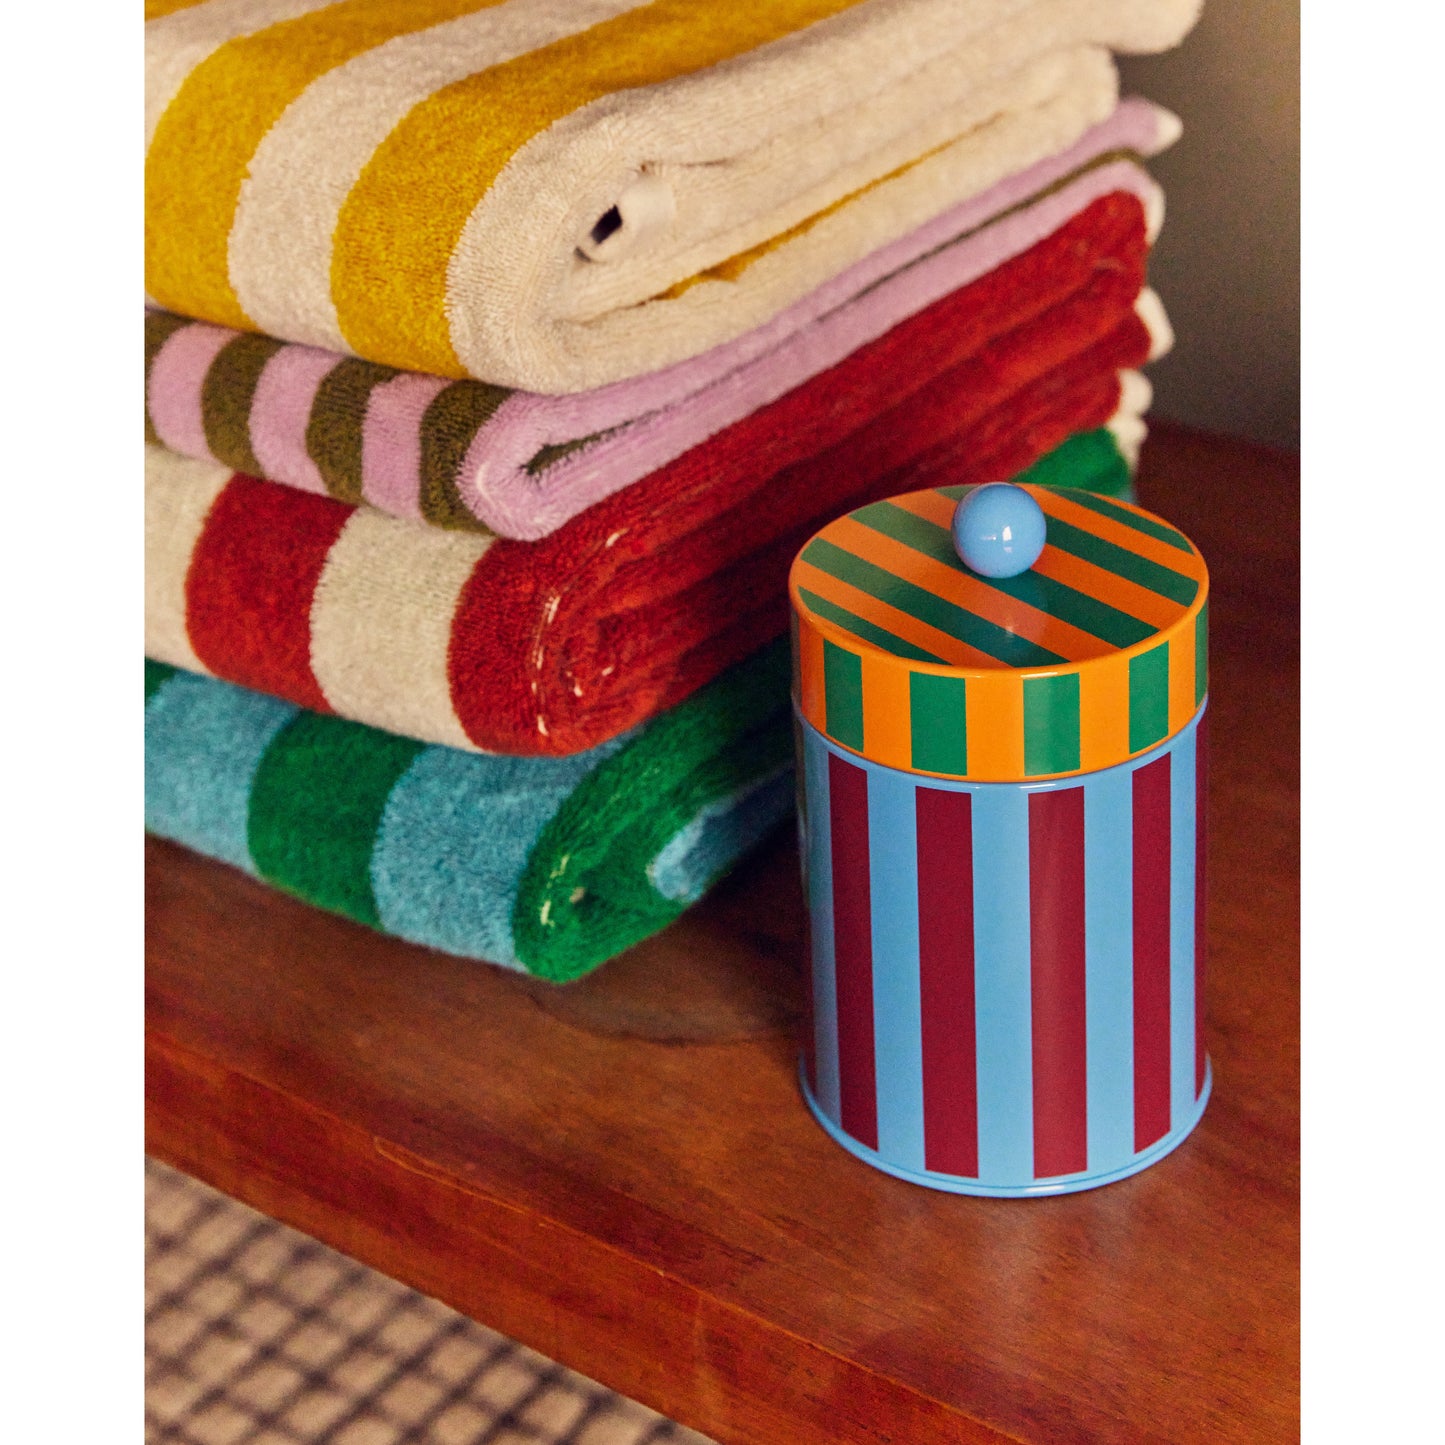 Striped Canister